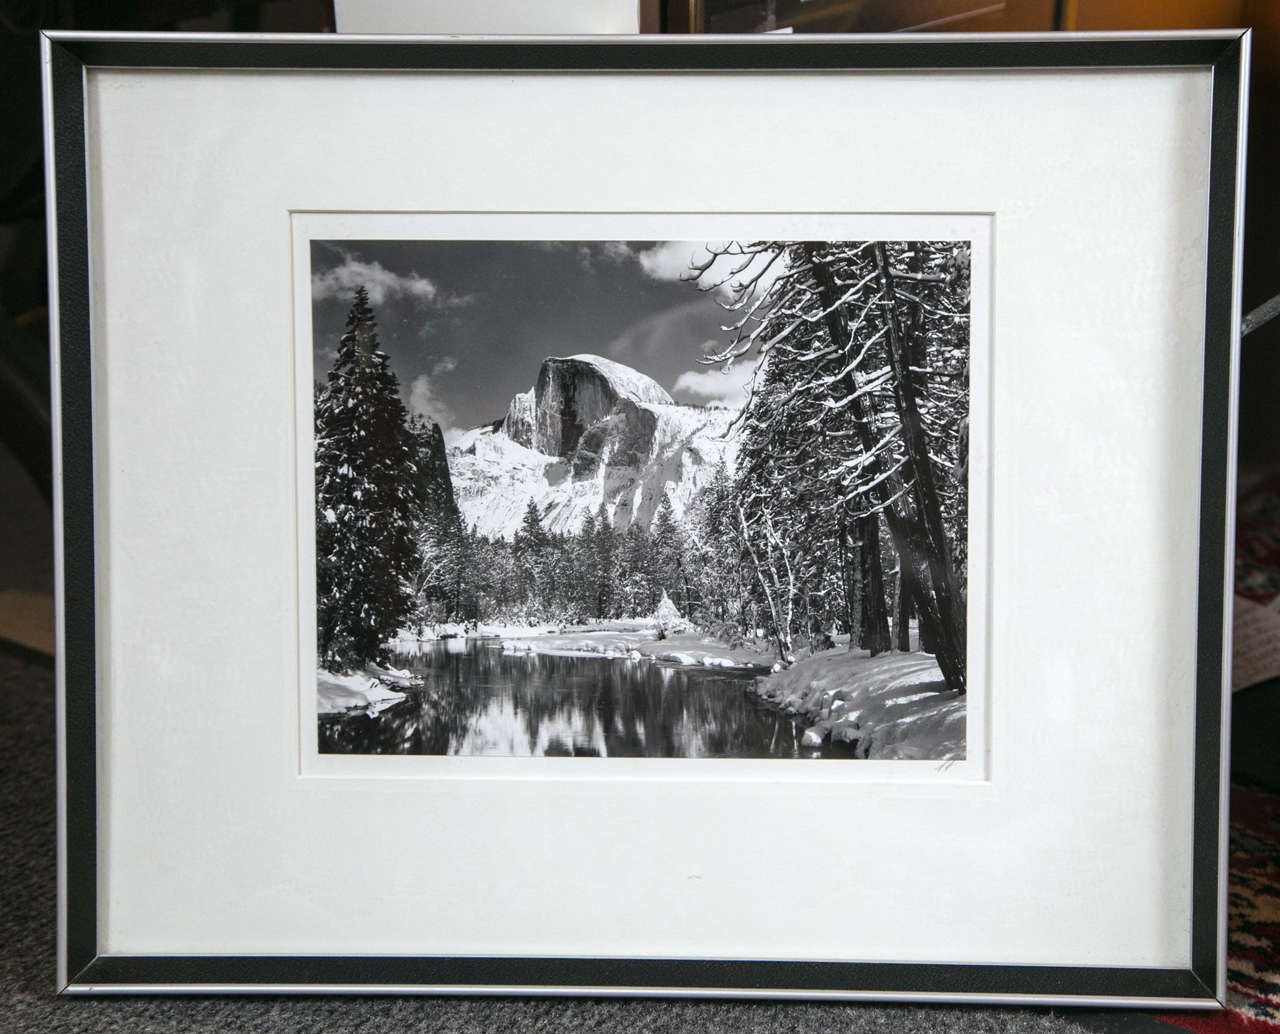 Framed silver gelatin print of half dome in winter with Merced River.  AA Initialed lower right.  Printed by Alan Ross from original negative.